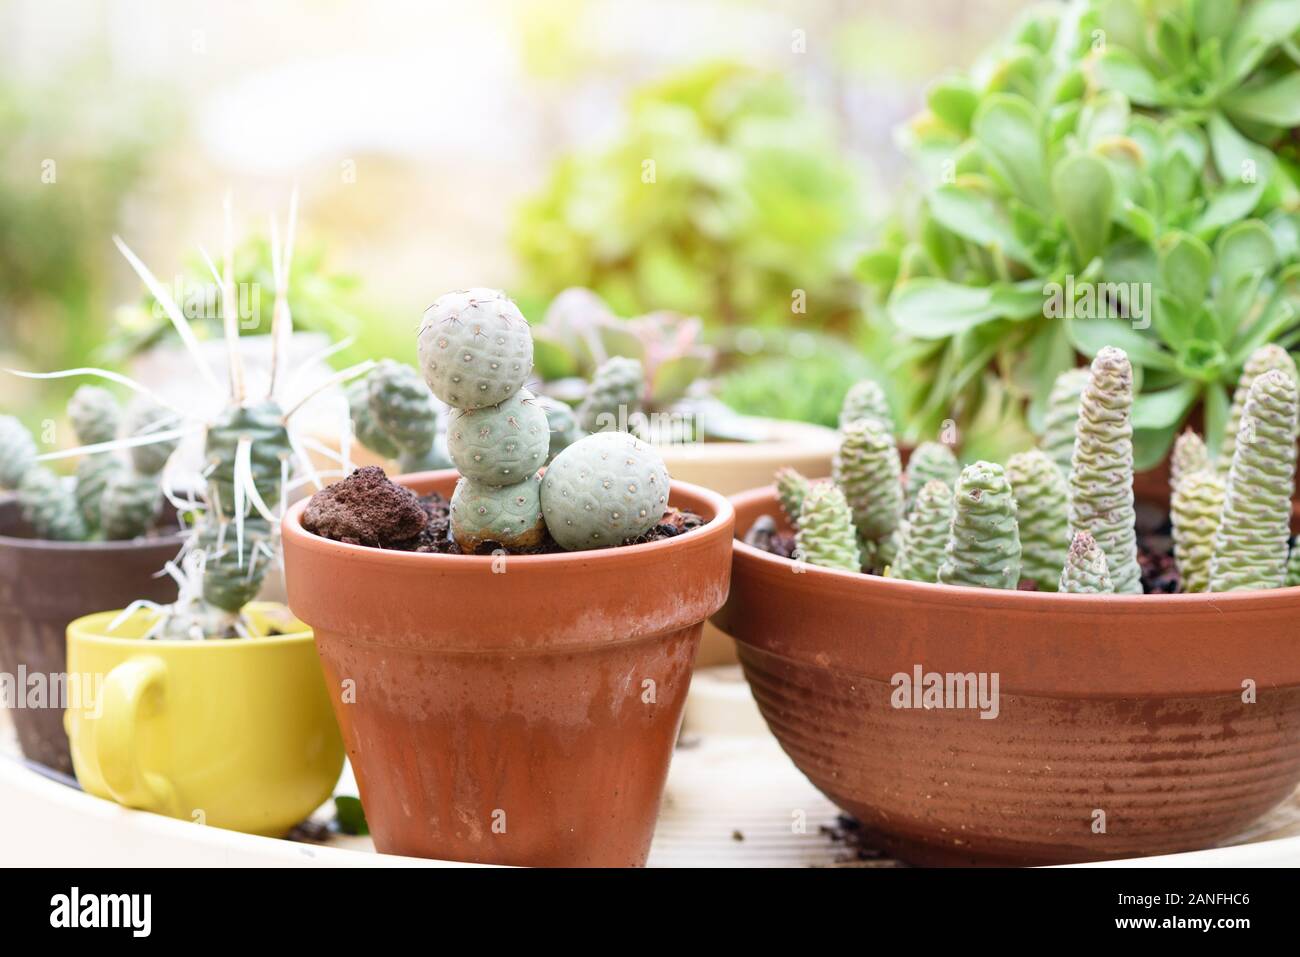 Group of Tephrocactus succulent plants in a sunny garden. Stock Photo